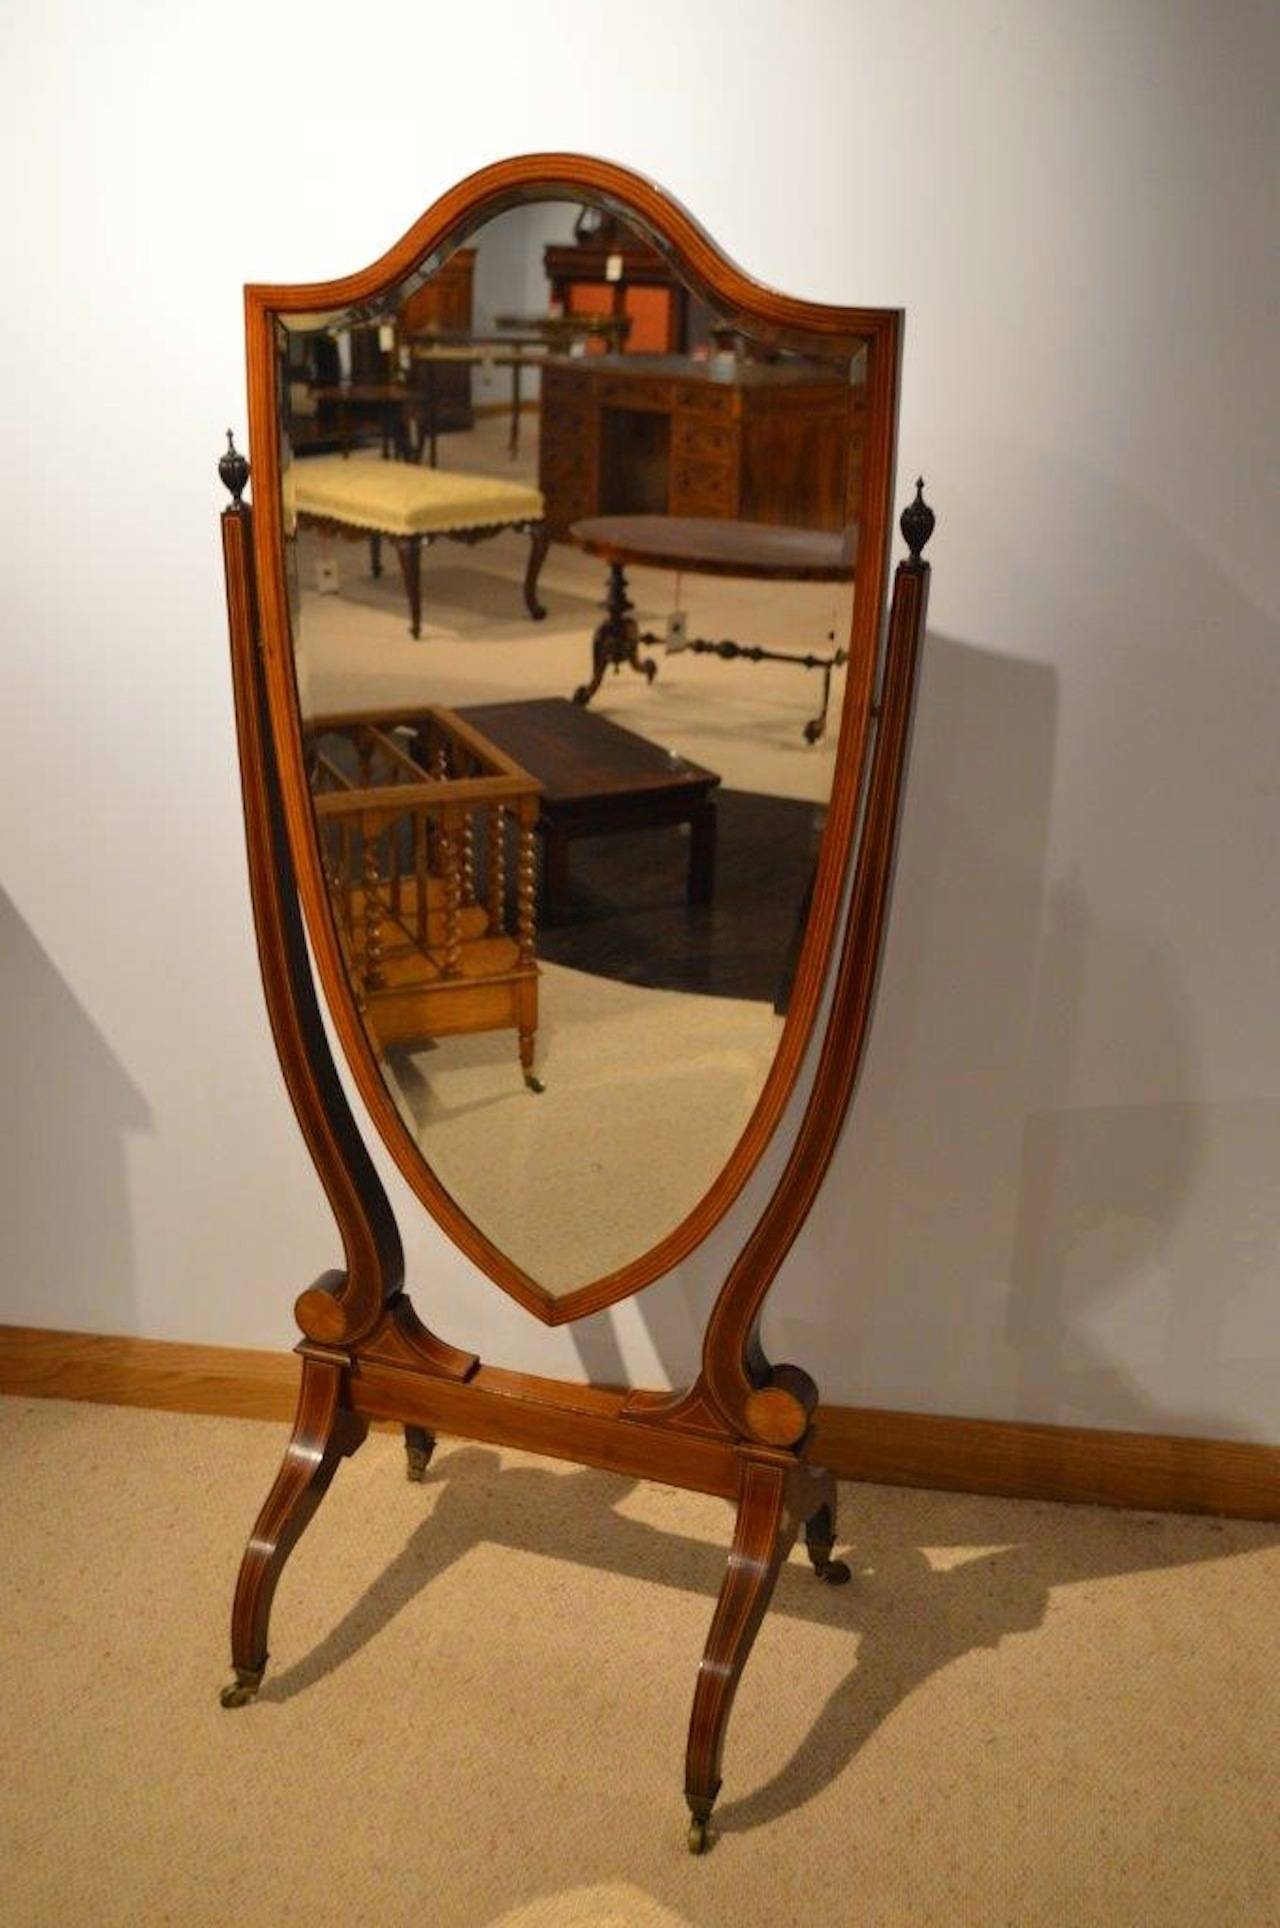 A beautiful mahogany inlaid Edwardian period antique cheval or dressing mirror. Having a shield shaped bevelled mirror with simple boxwood line inlaid detail, supported on lyre ends with beautifully carved mahogany finials and shell inlaid paterae.